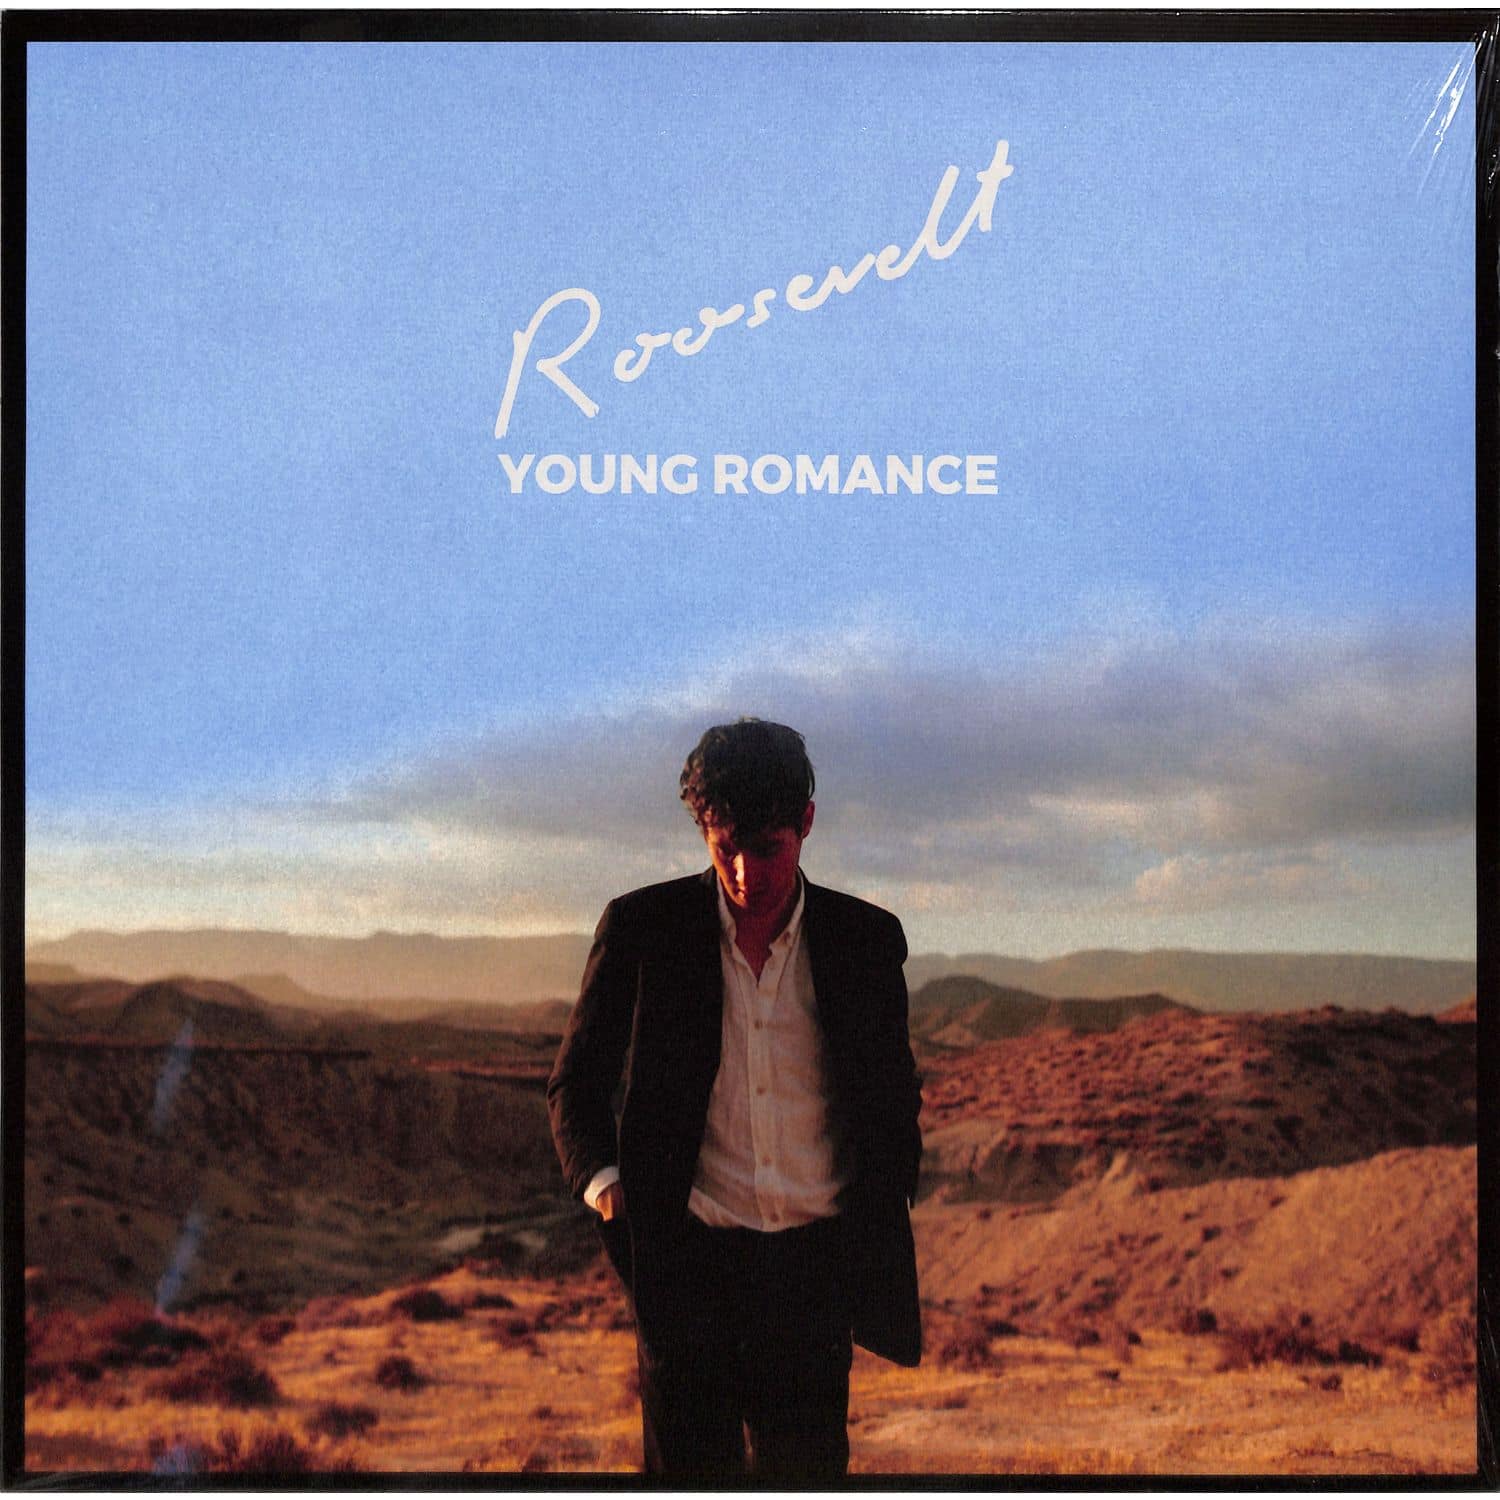 Roosevelt - YOUNG ROMANCE 